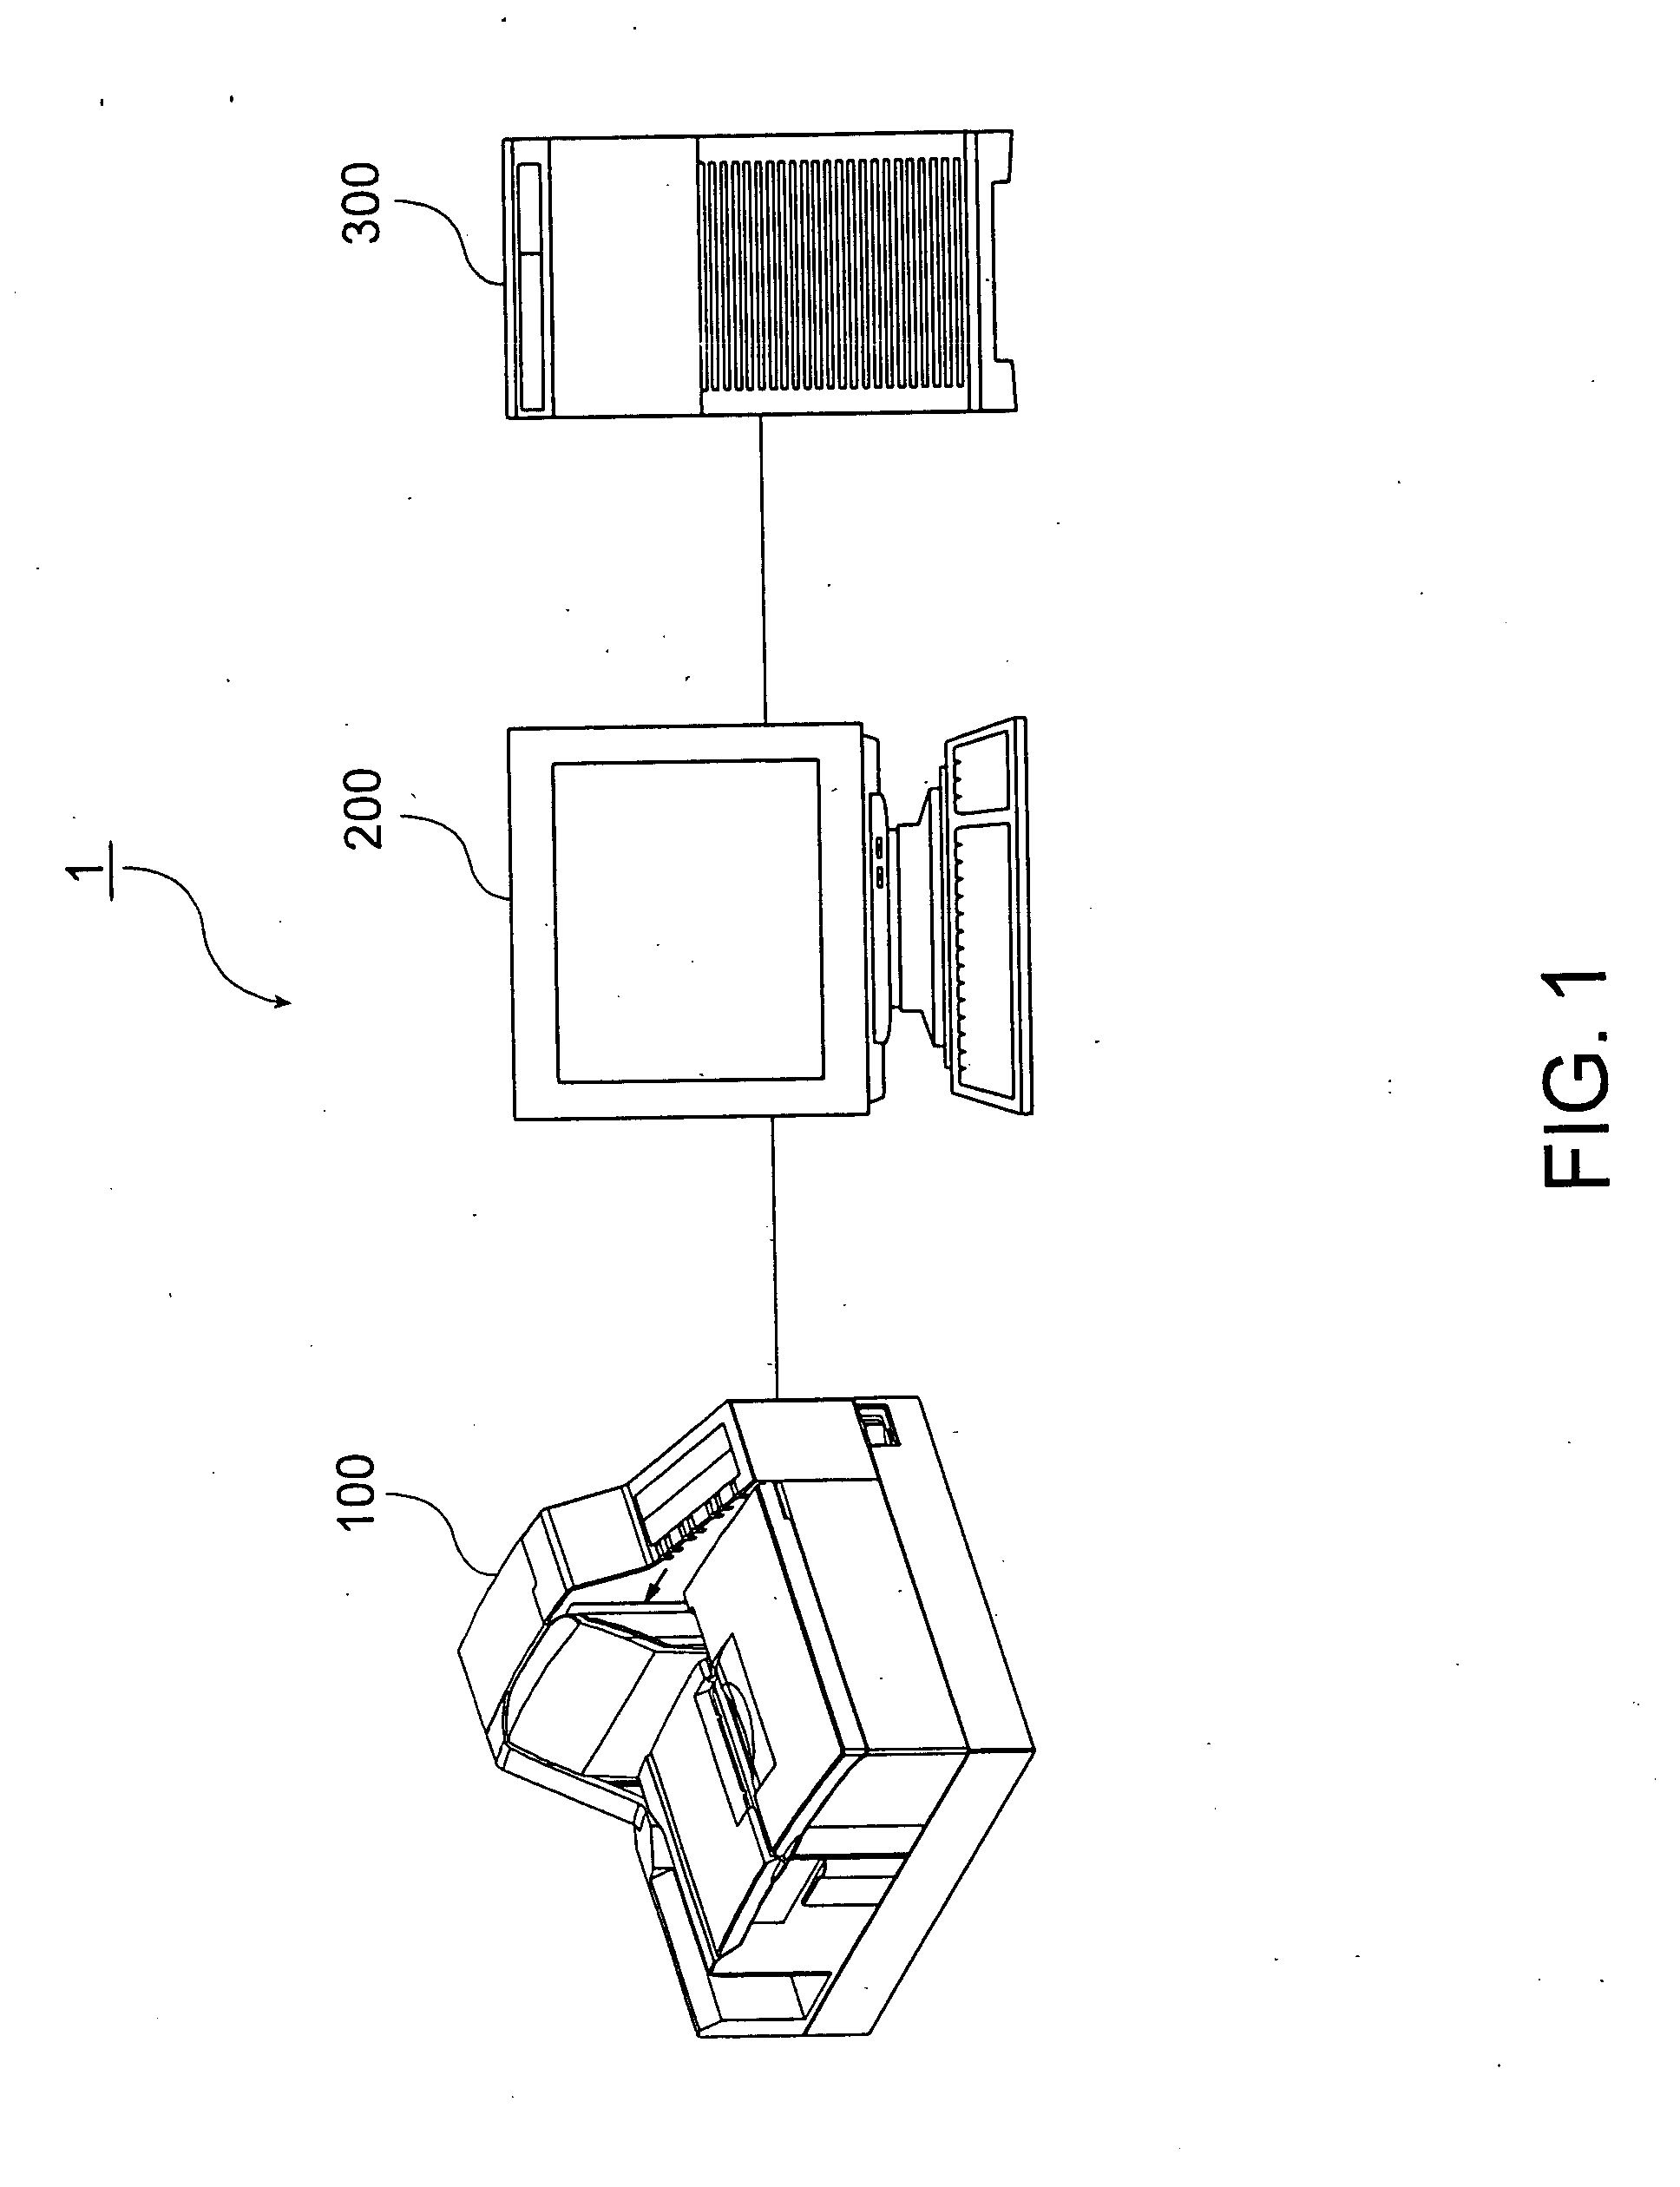 Processing apparatus, system and method for processing checks in communication with a host computer and a host computer for controlling the check processing apparatus